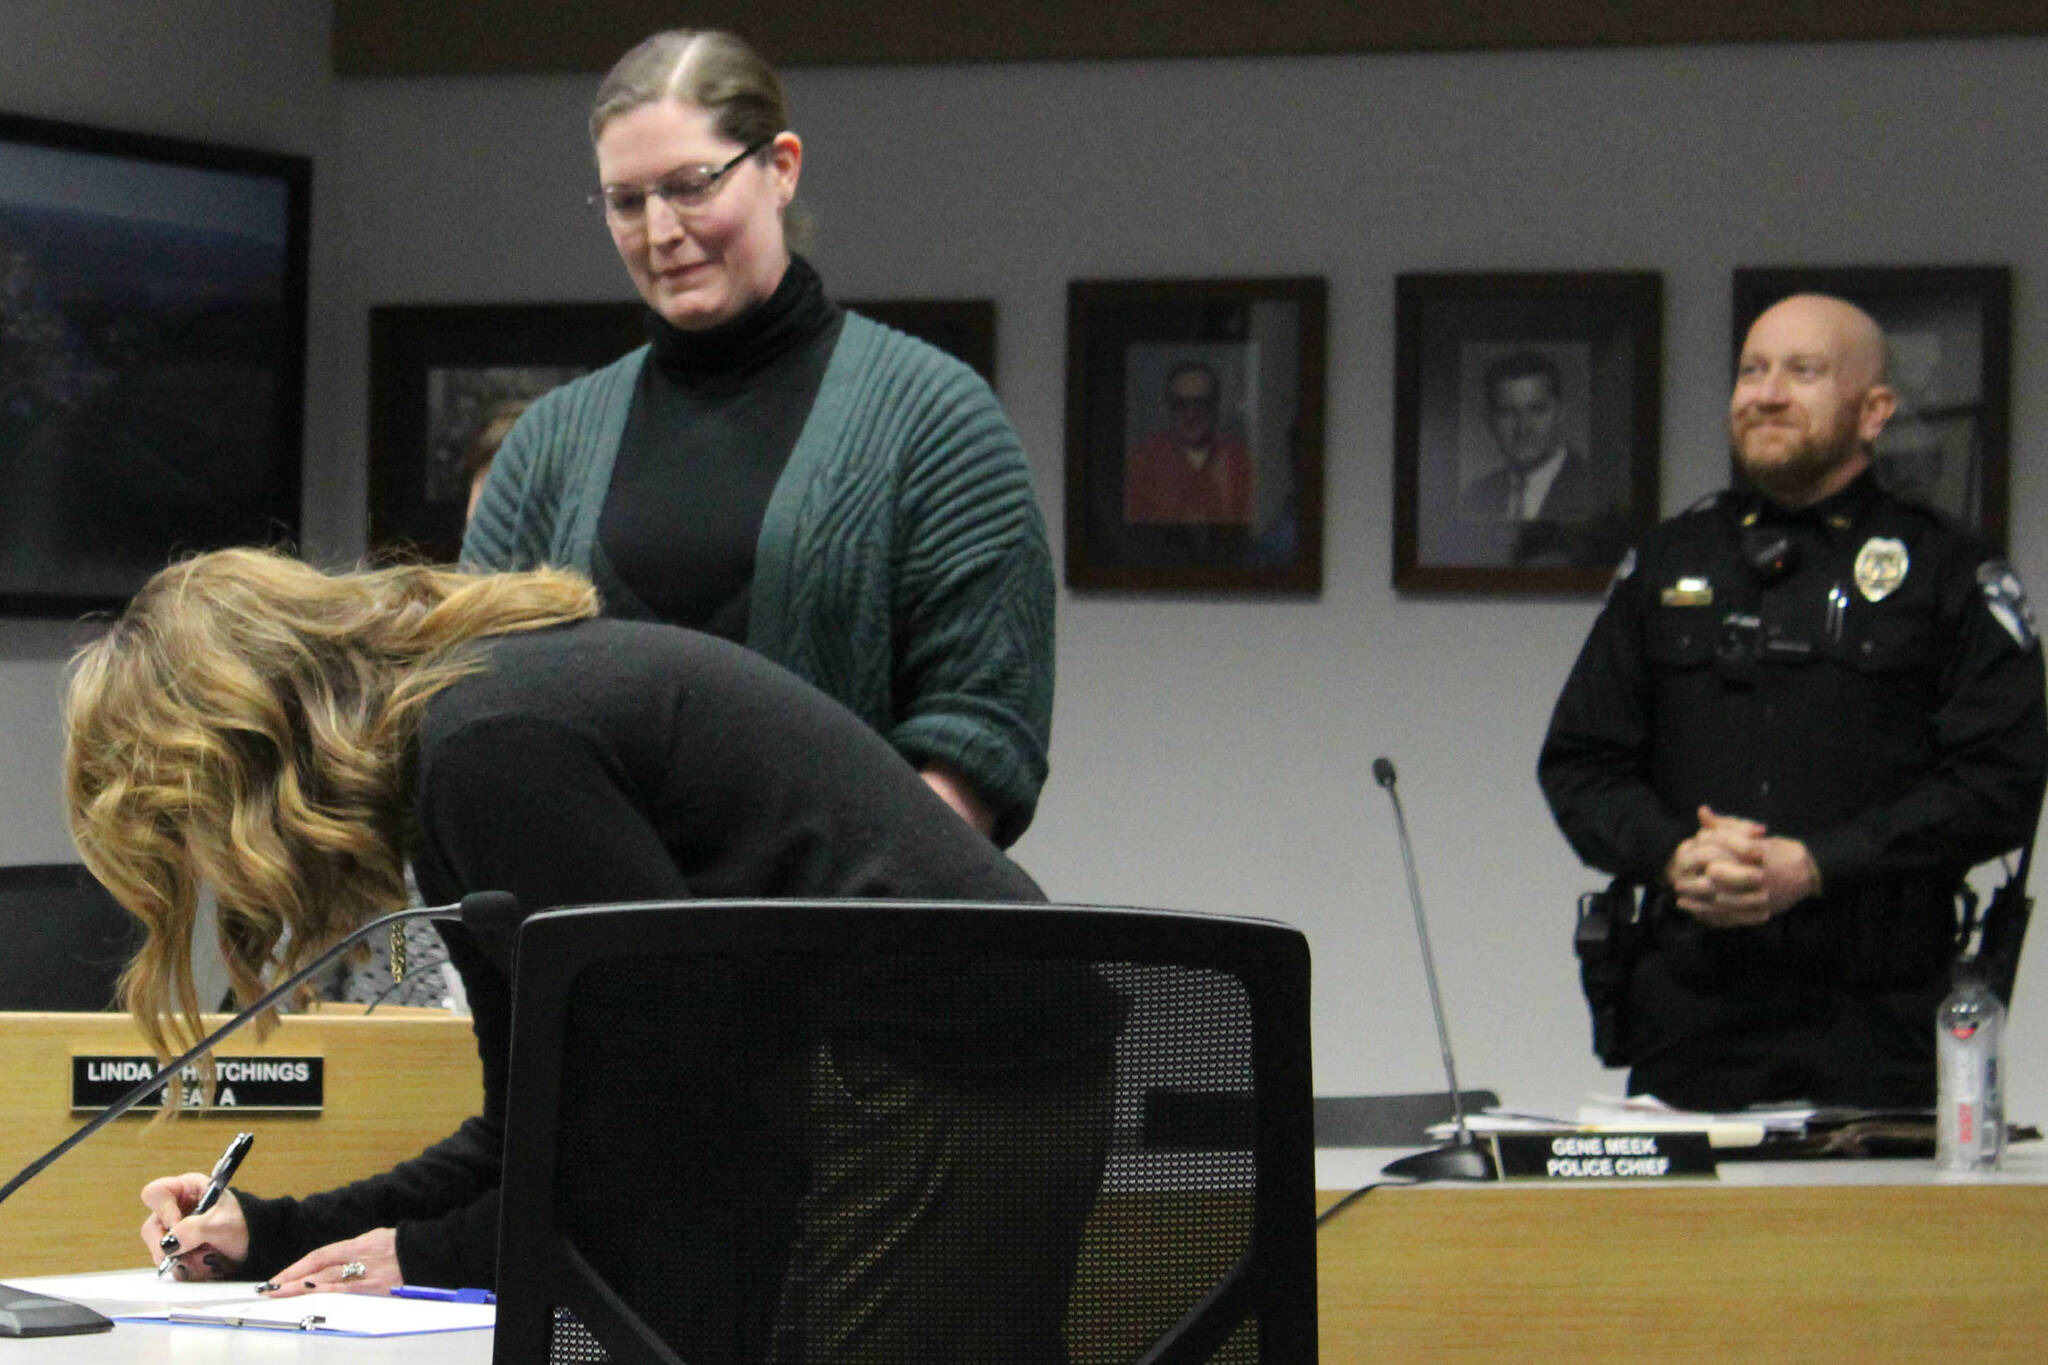 Johni Blankenship signs her name after being sworn in as Soldotna City Clerk at a city council meeting on Wednesday, Nov. 30, 2022, in Soldotna, Alaska. (Ashlyn O’Hara/Peninsula Clarion)